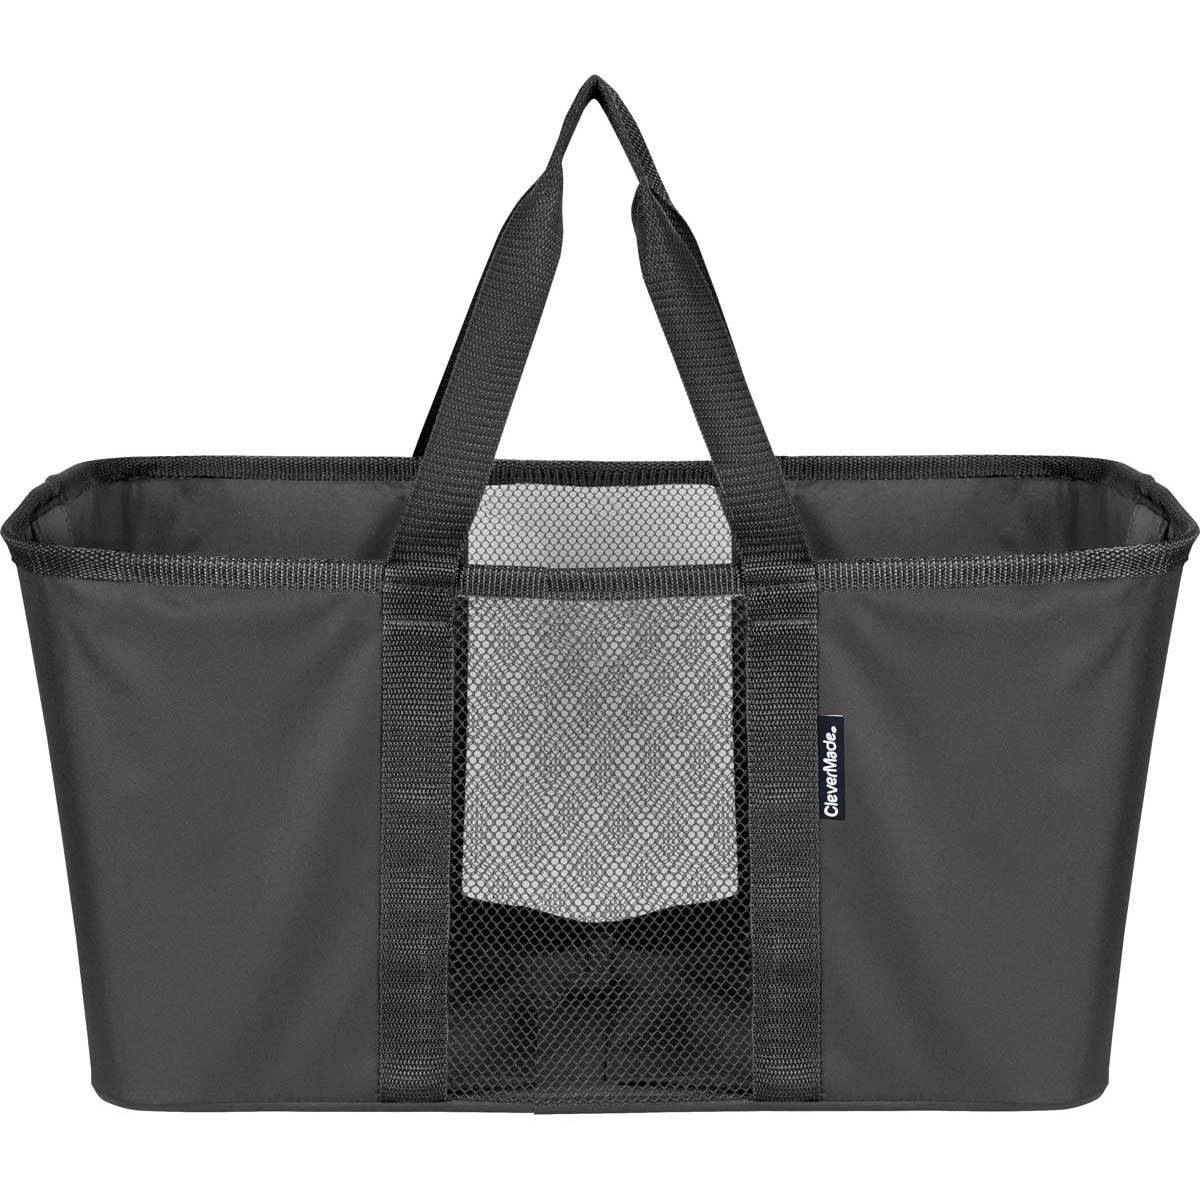 Clevermade Collapsible Laundry Tote, , bcf_hi-res